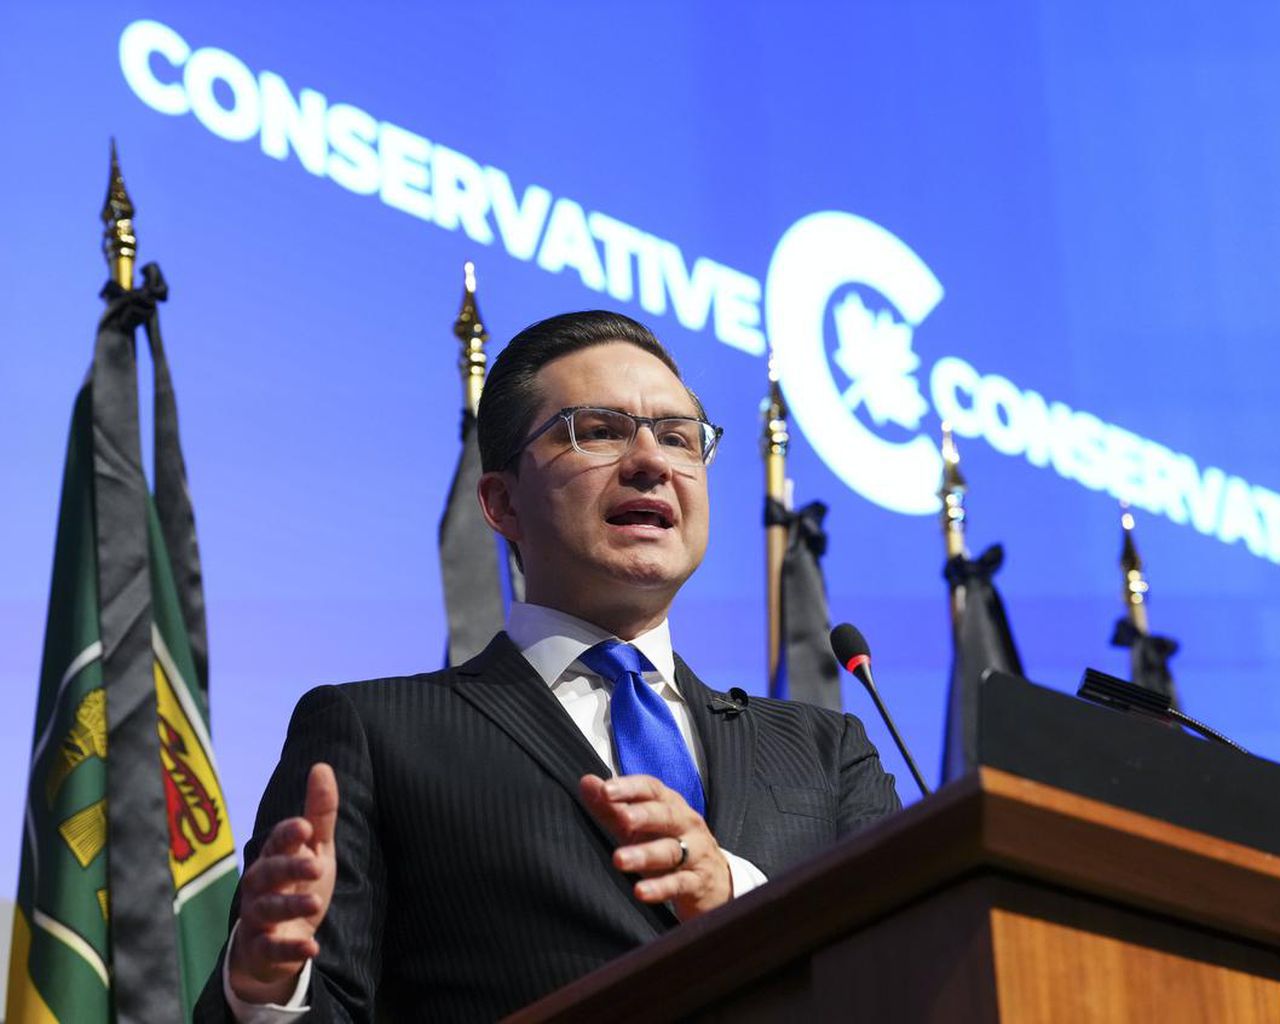 Pierre Poilievre: The Conservative Politician Making Waves in Canadian Politics